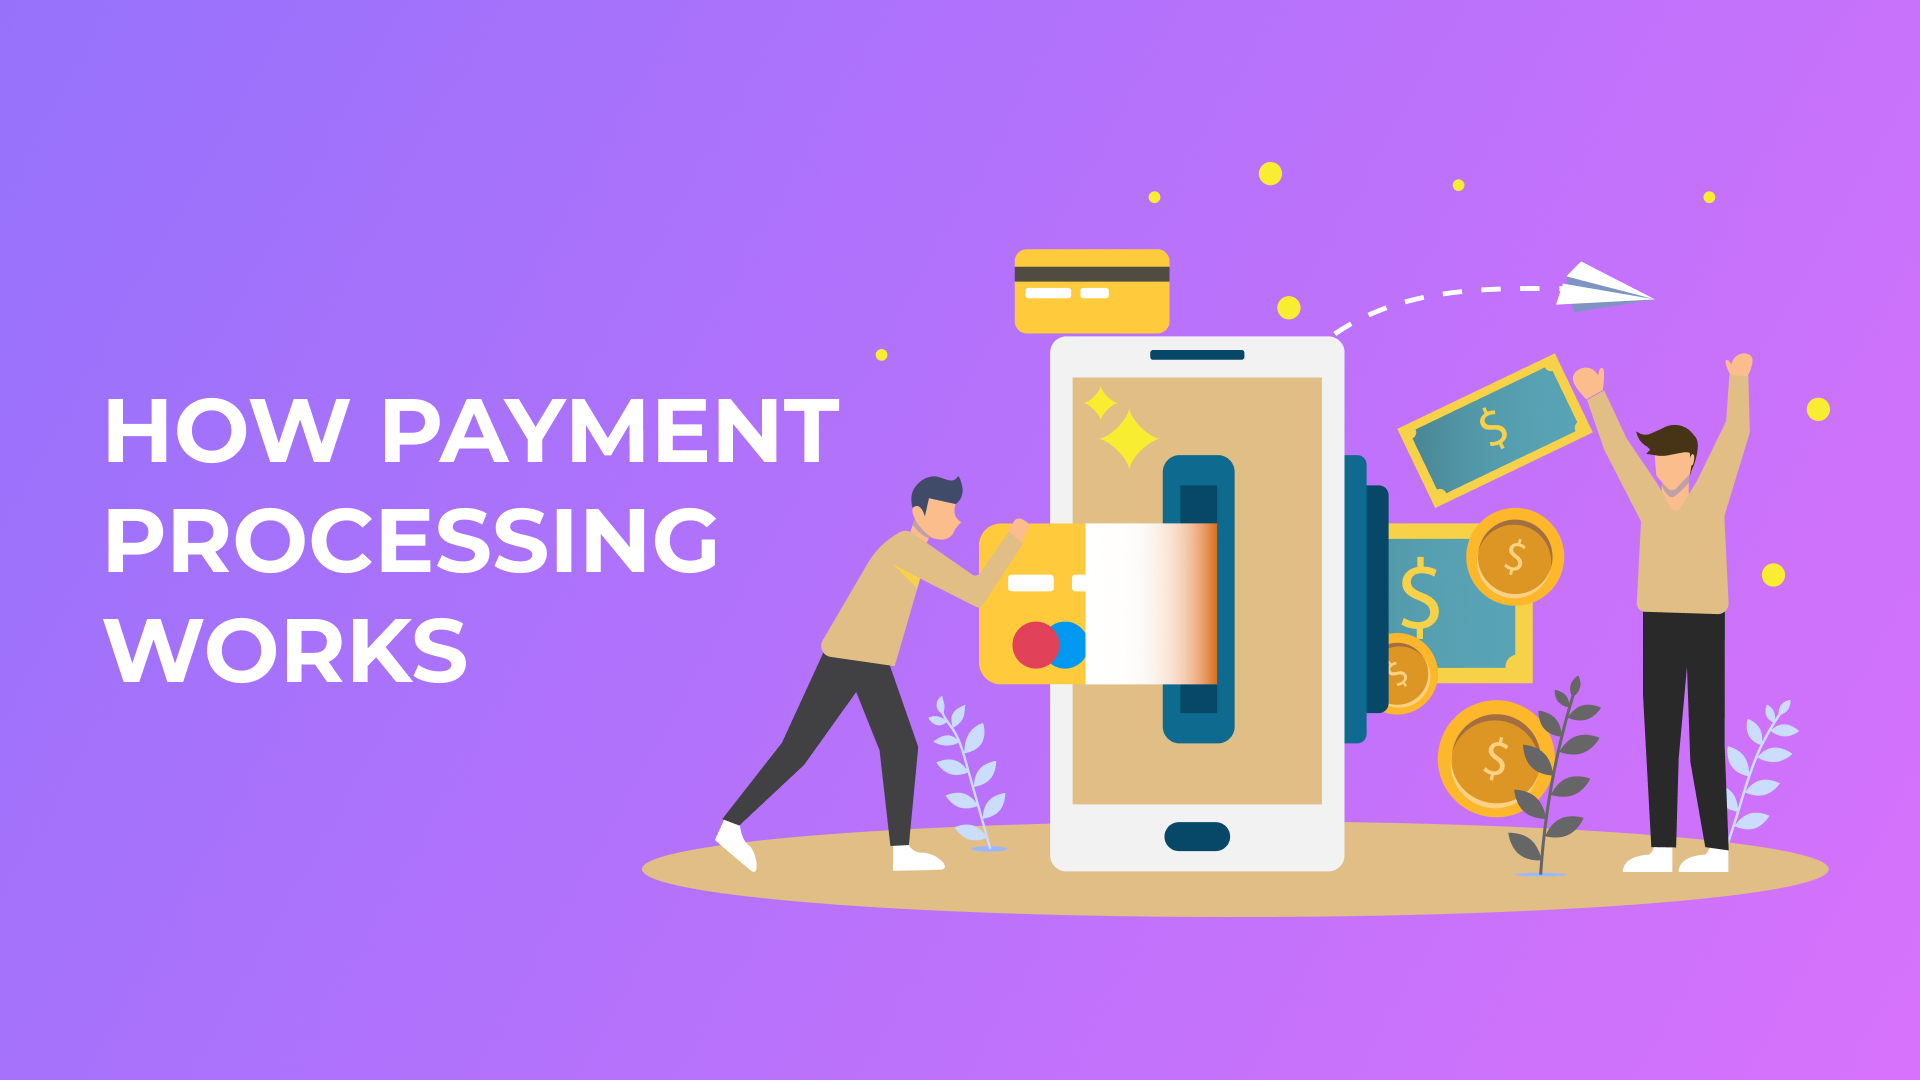 How payment processing works